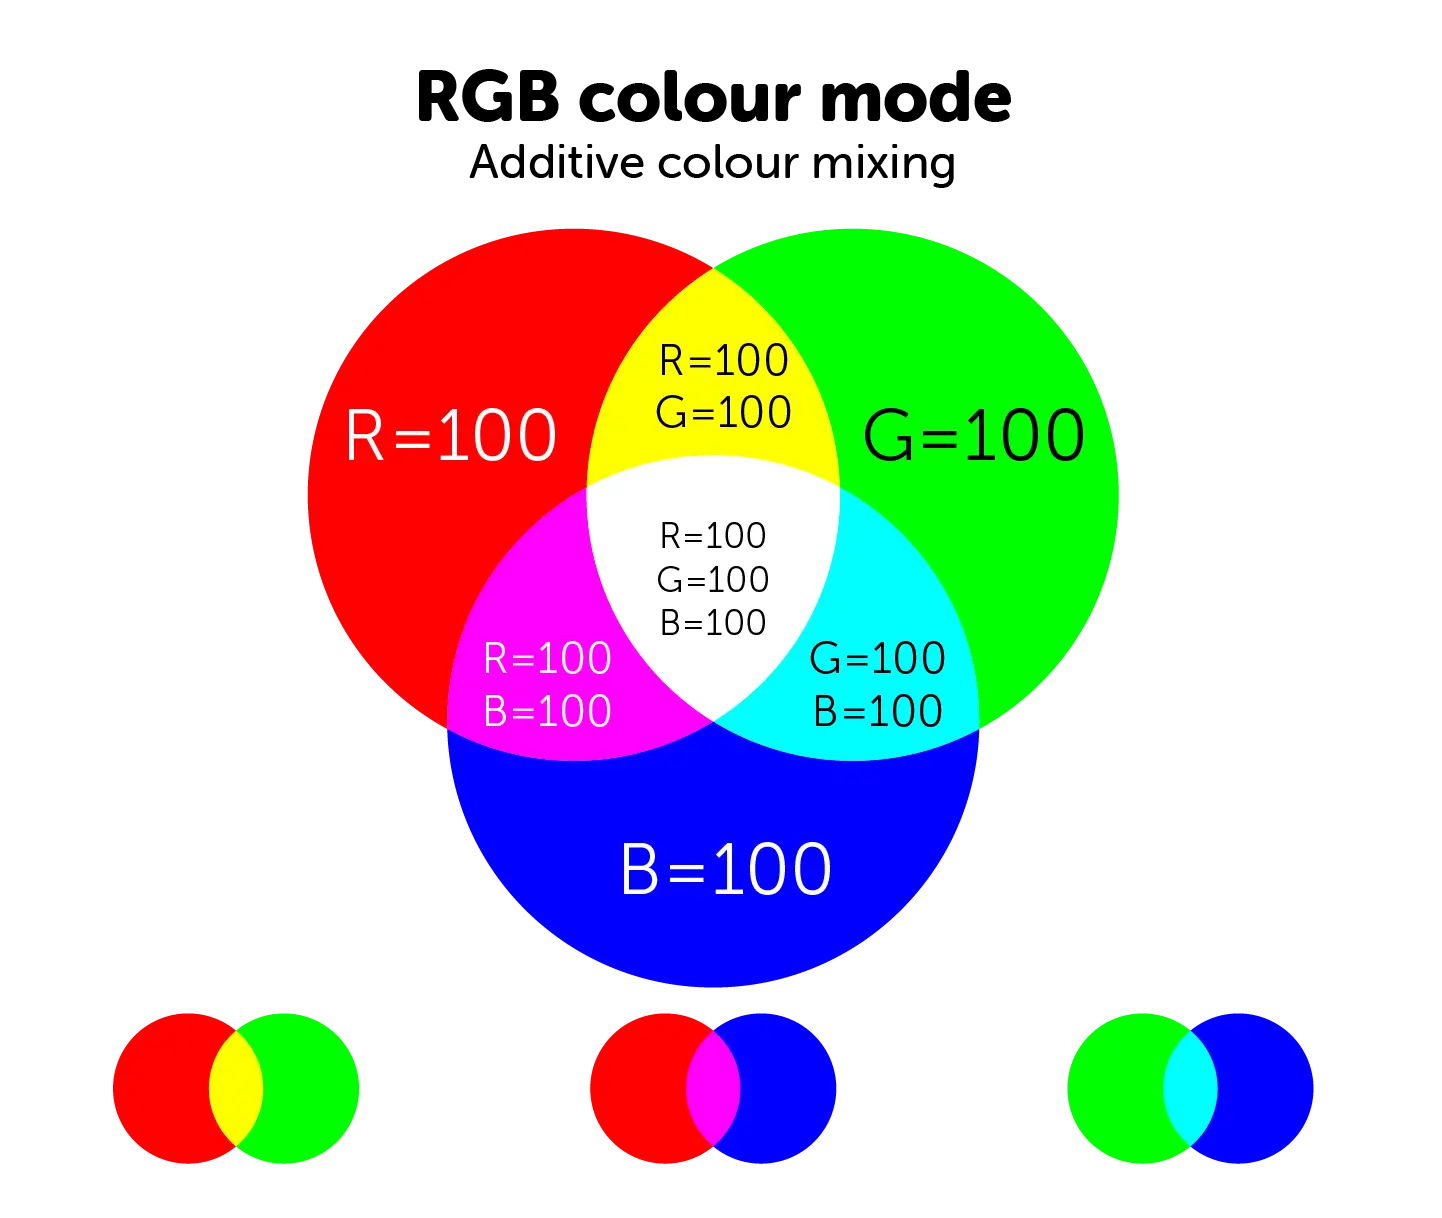 RGB is an additive colour mode - the more light you add, the closer you get to white.